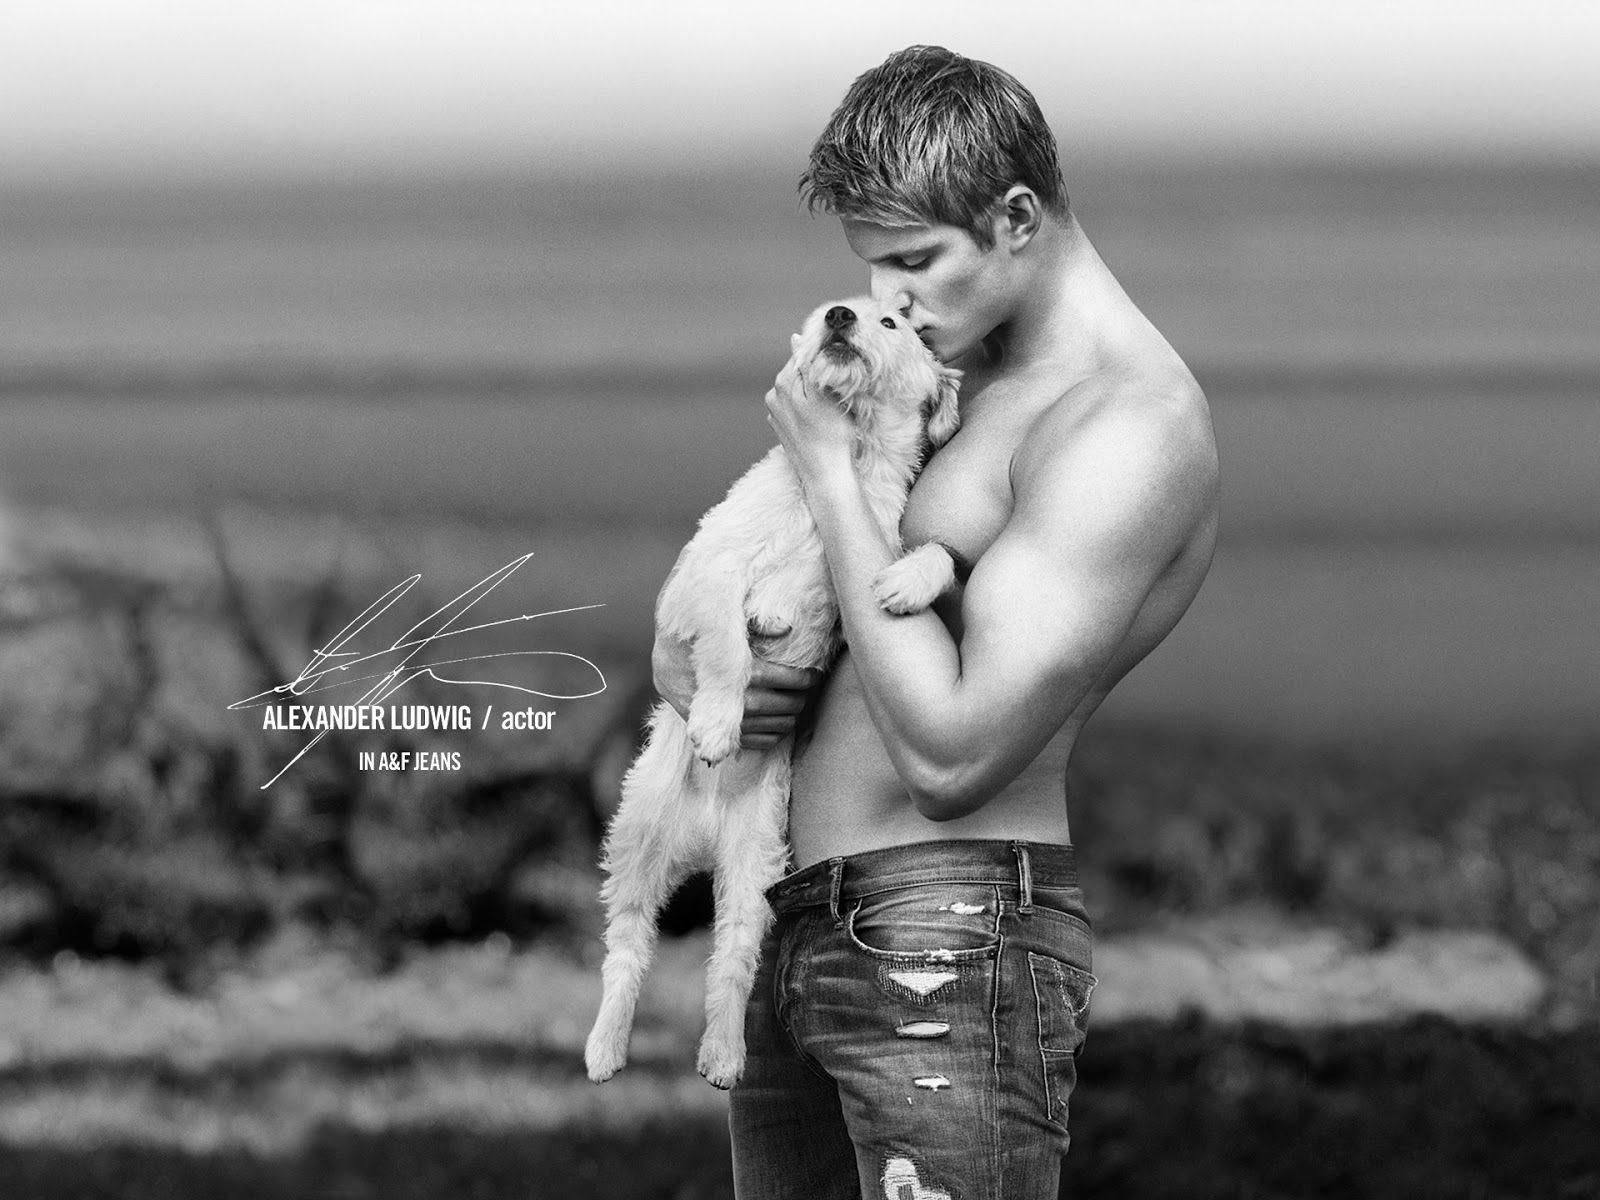 The Sitch On Fitch: S.M. Highlights!. Top 10 Abercrombie Models To #